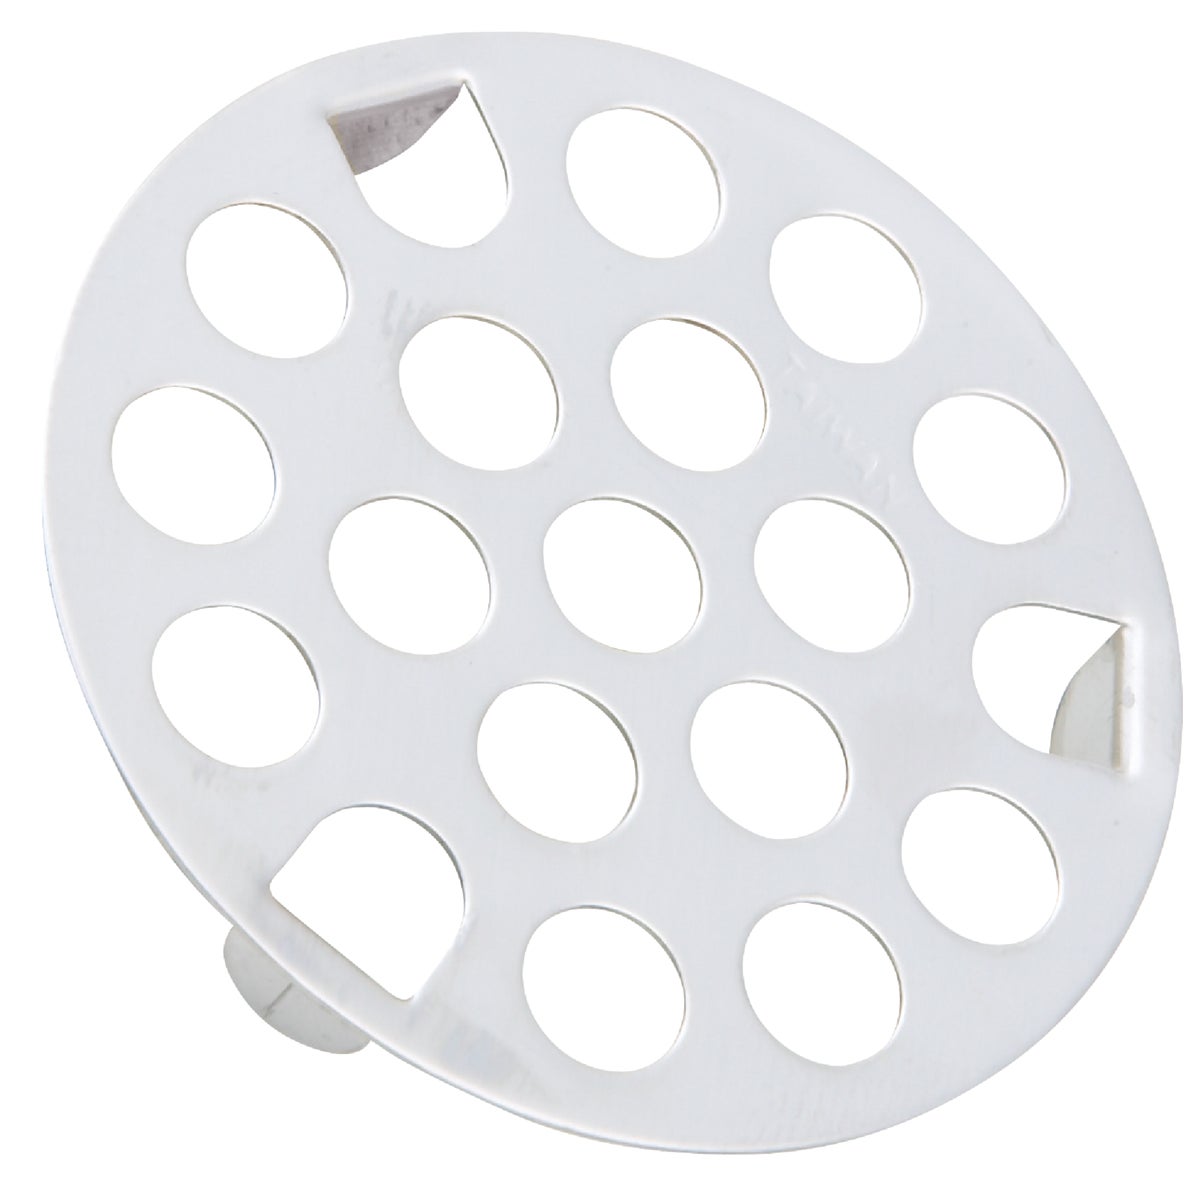 LASCO 03-1357 3-1/4-Inch Snap In Style Shower Drain Grate, Chrome Plated -  Bathroom Sink And Tub Drain Strainers 